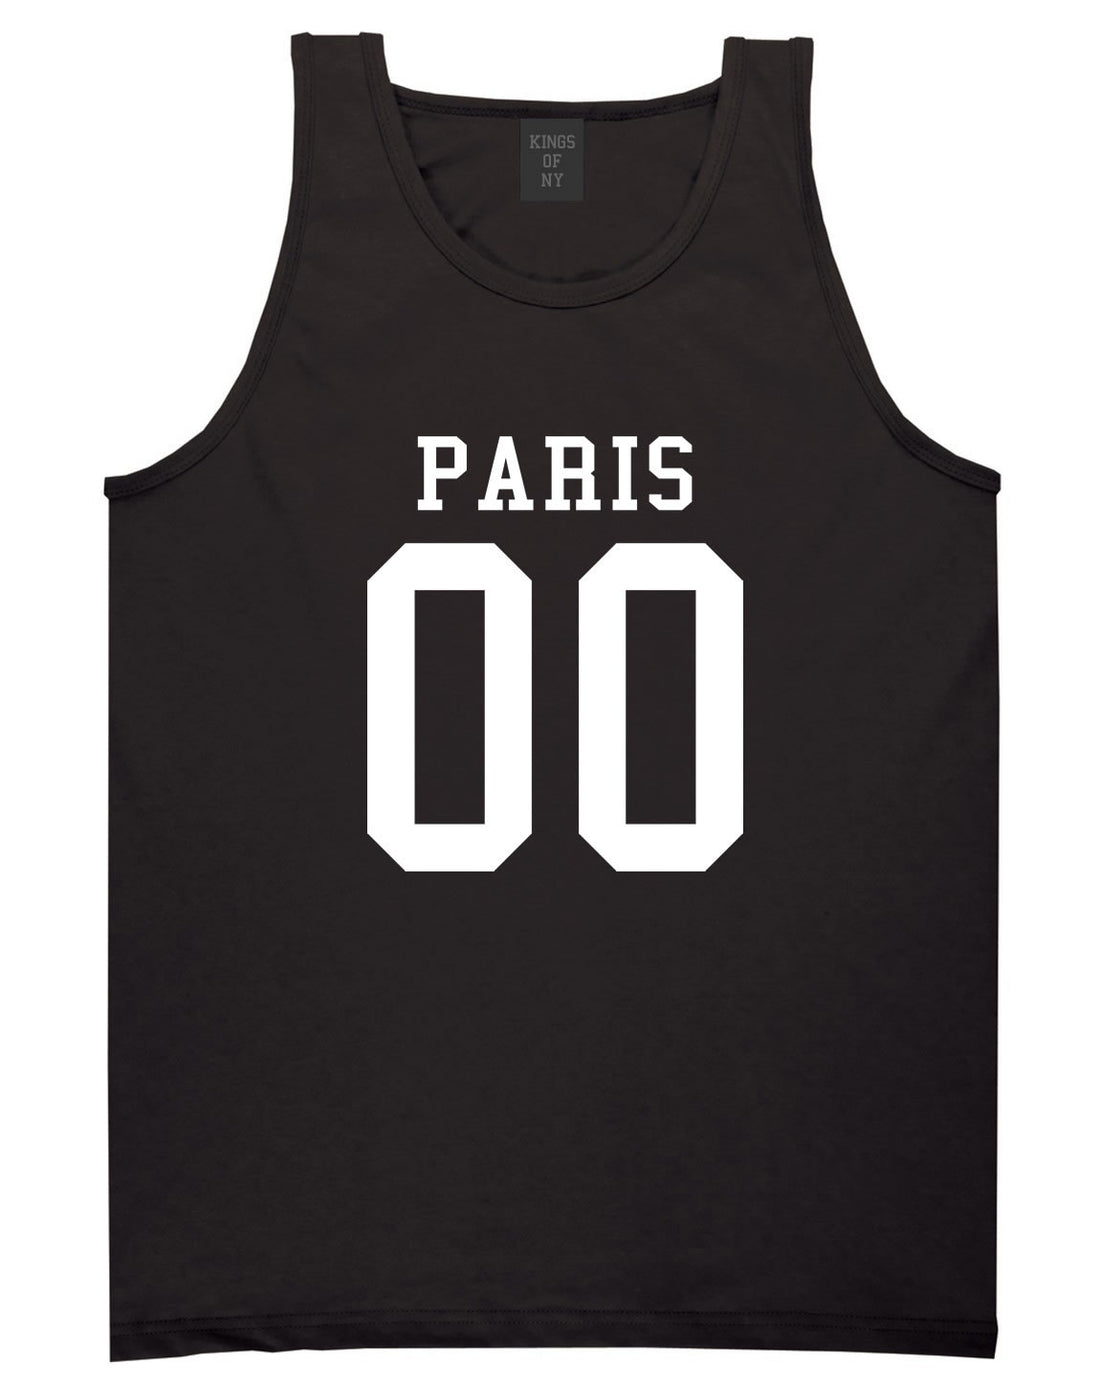 Paris Team 00 Jersey Tank Top in Black By Kings Of NY